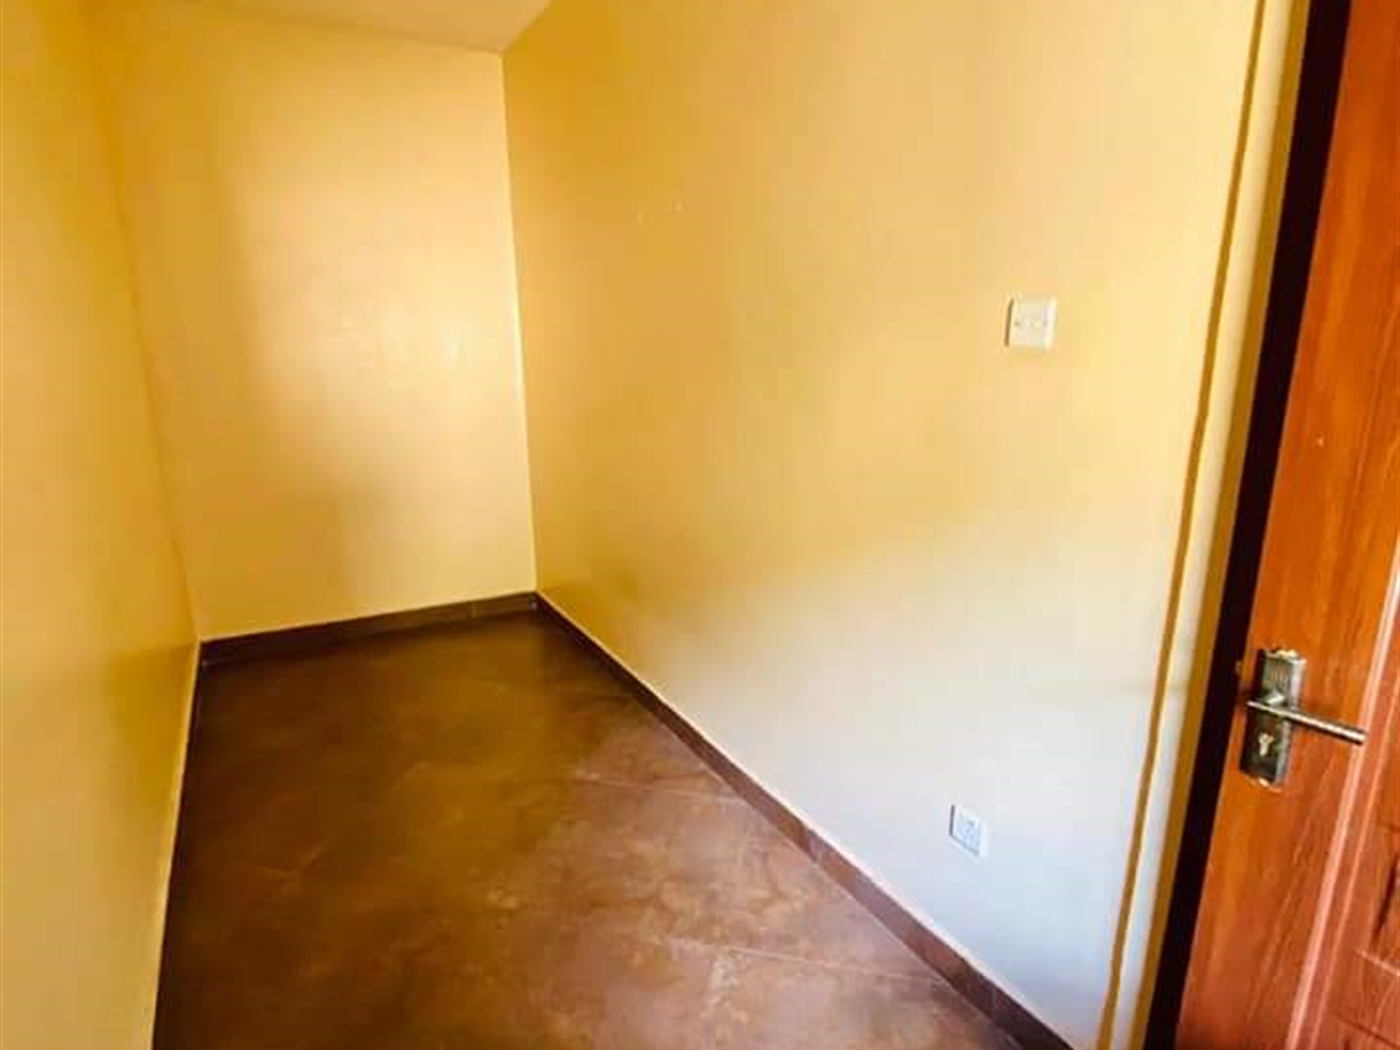 Penthouse for rent in Luzira Kampala